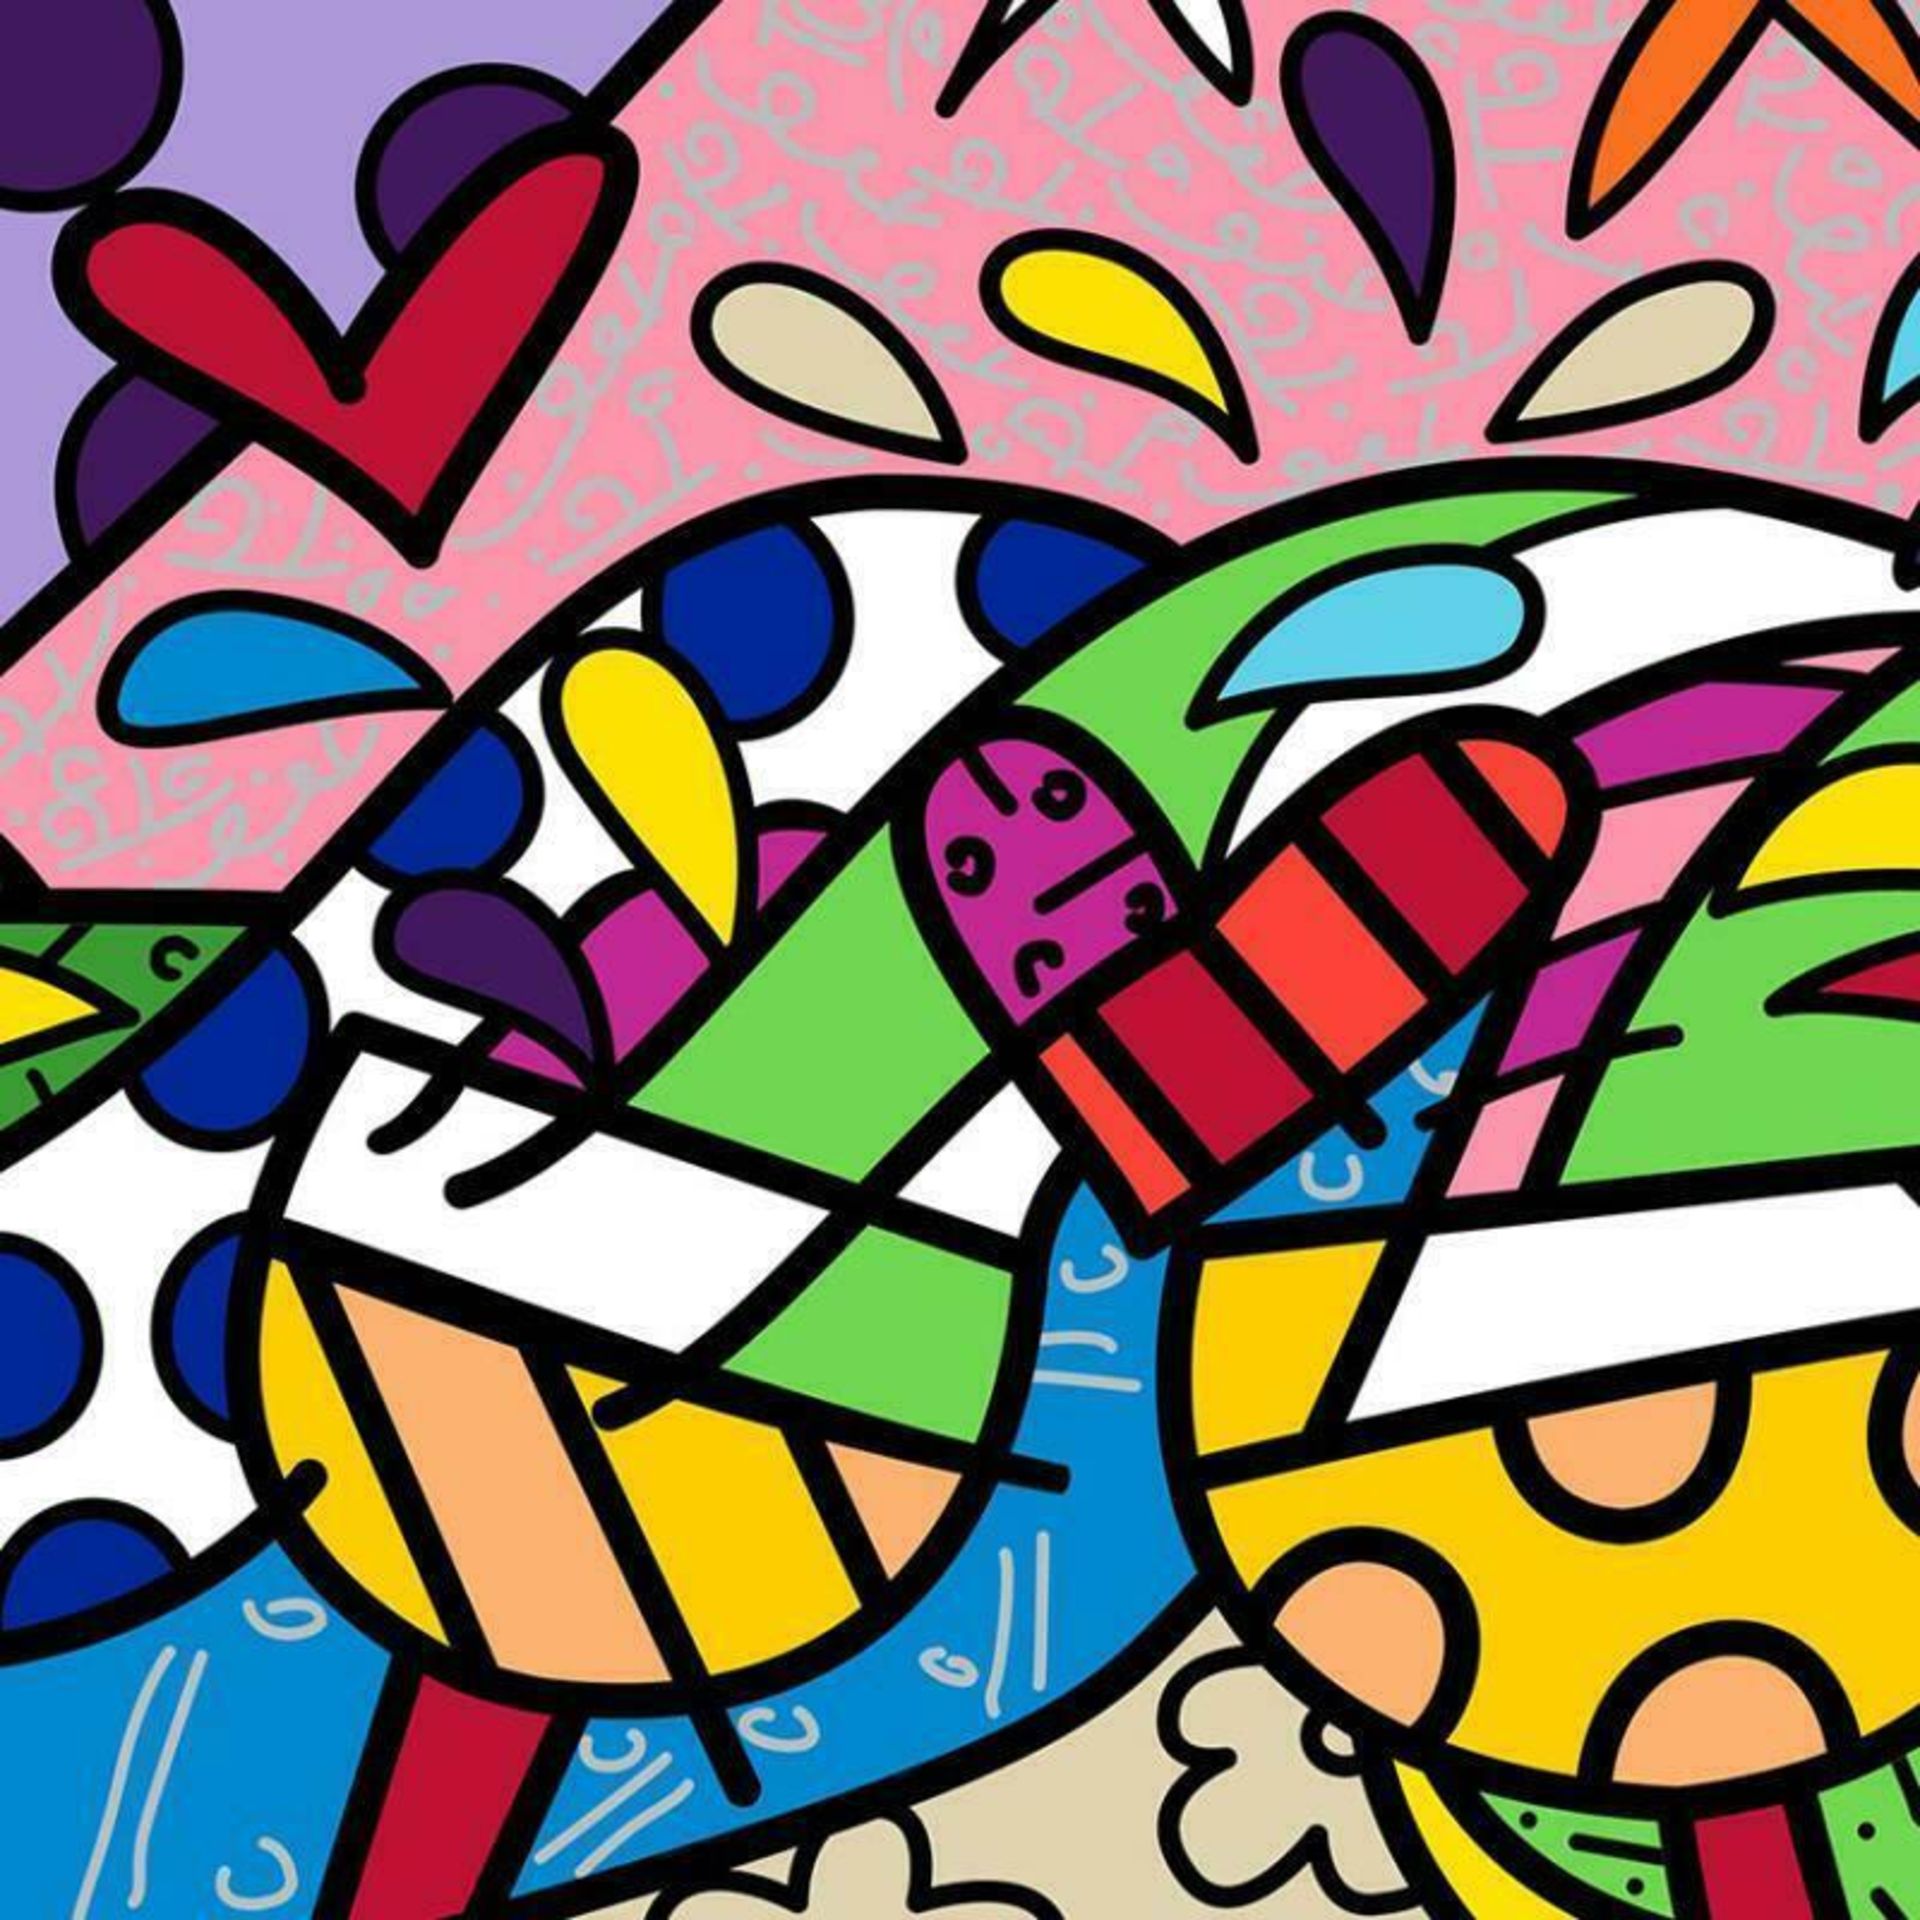 Romero Britto "Wine Country Yellow" Hand Signed Limited Edition Giclee on Canvas - Image 2 of 2